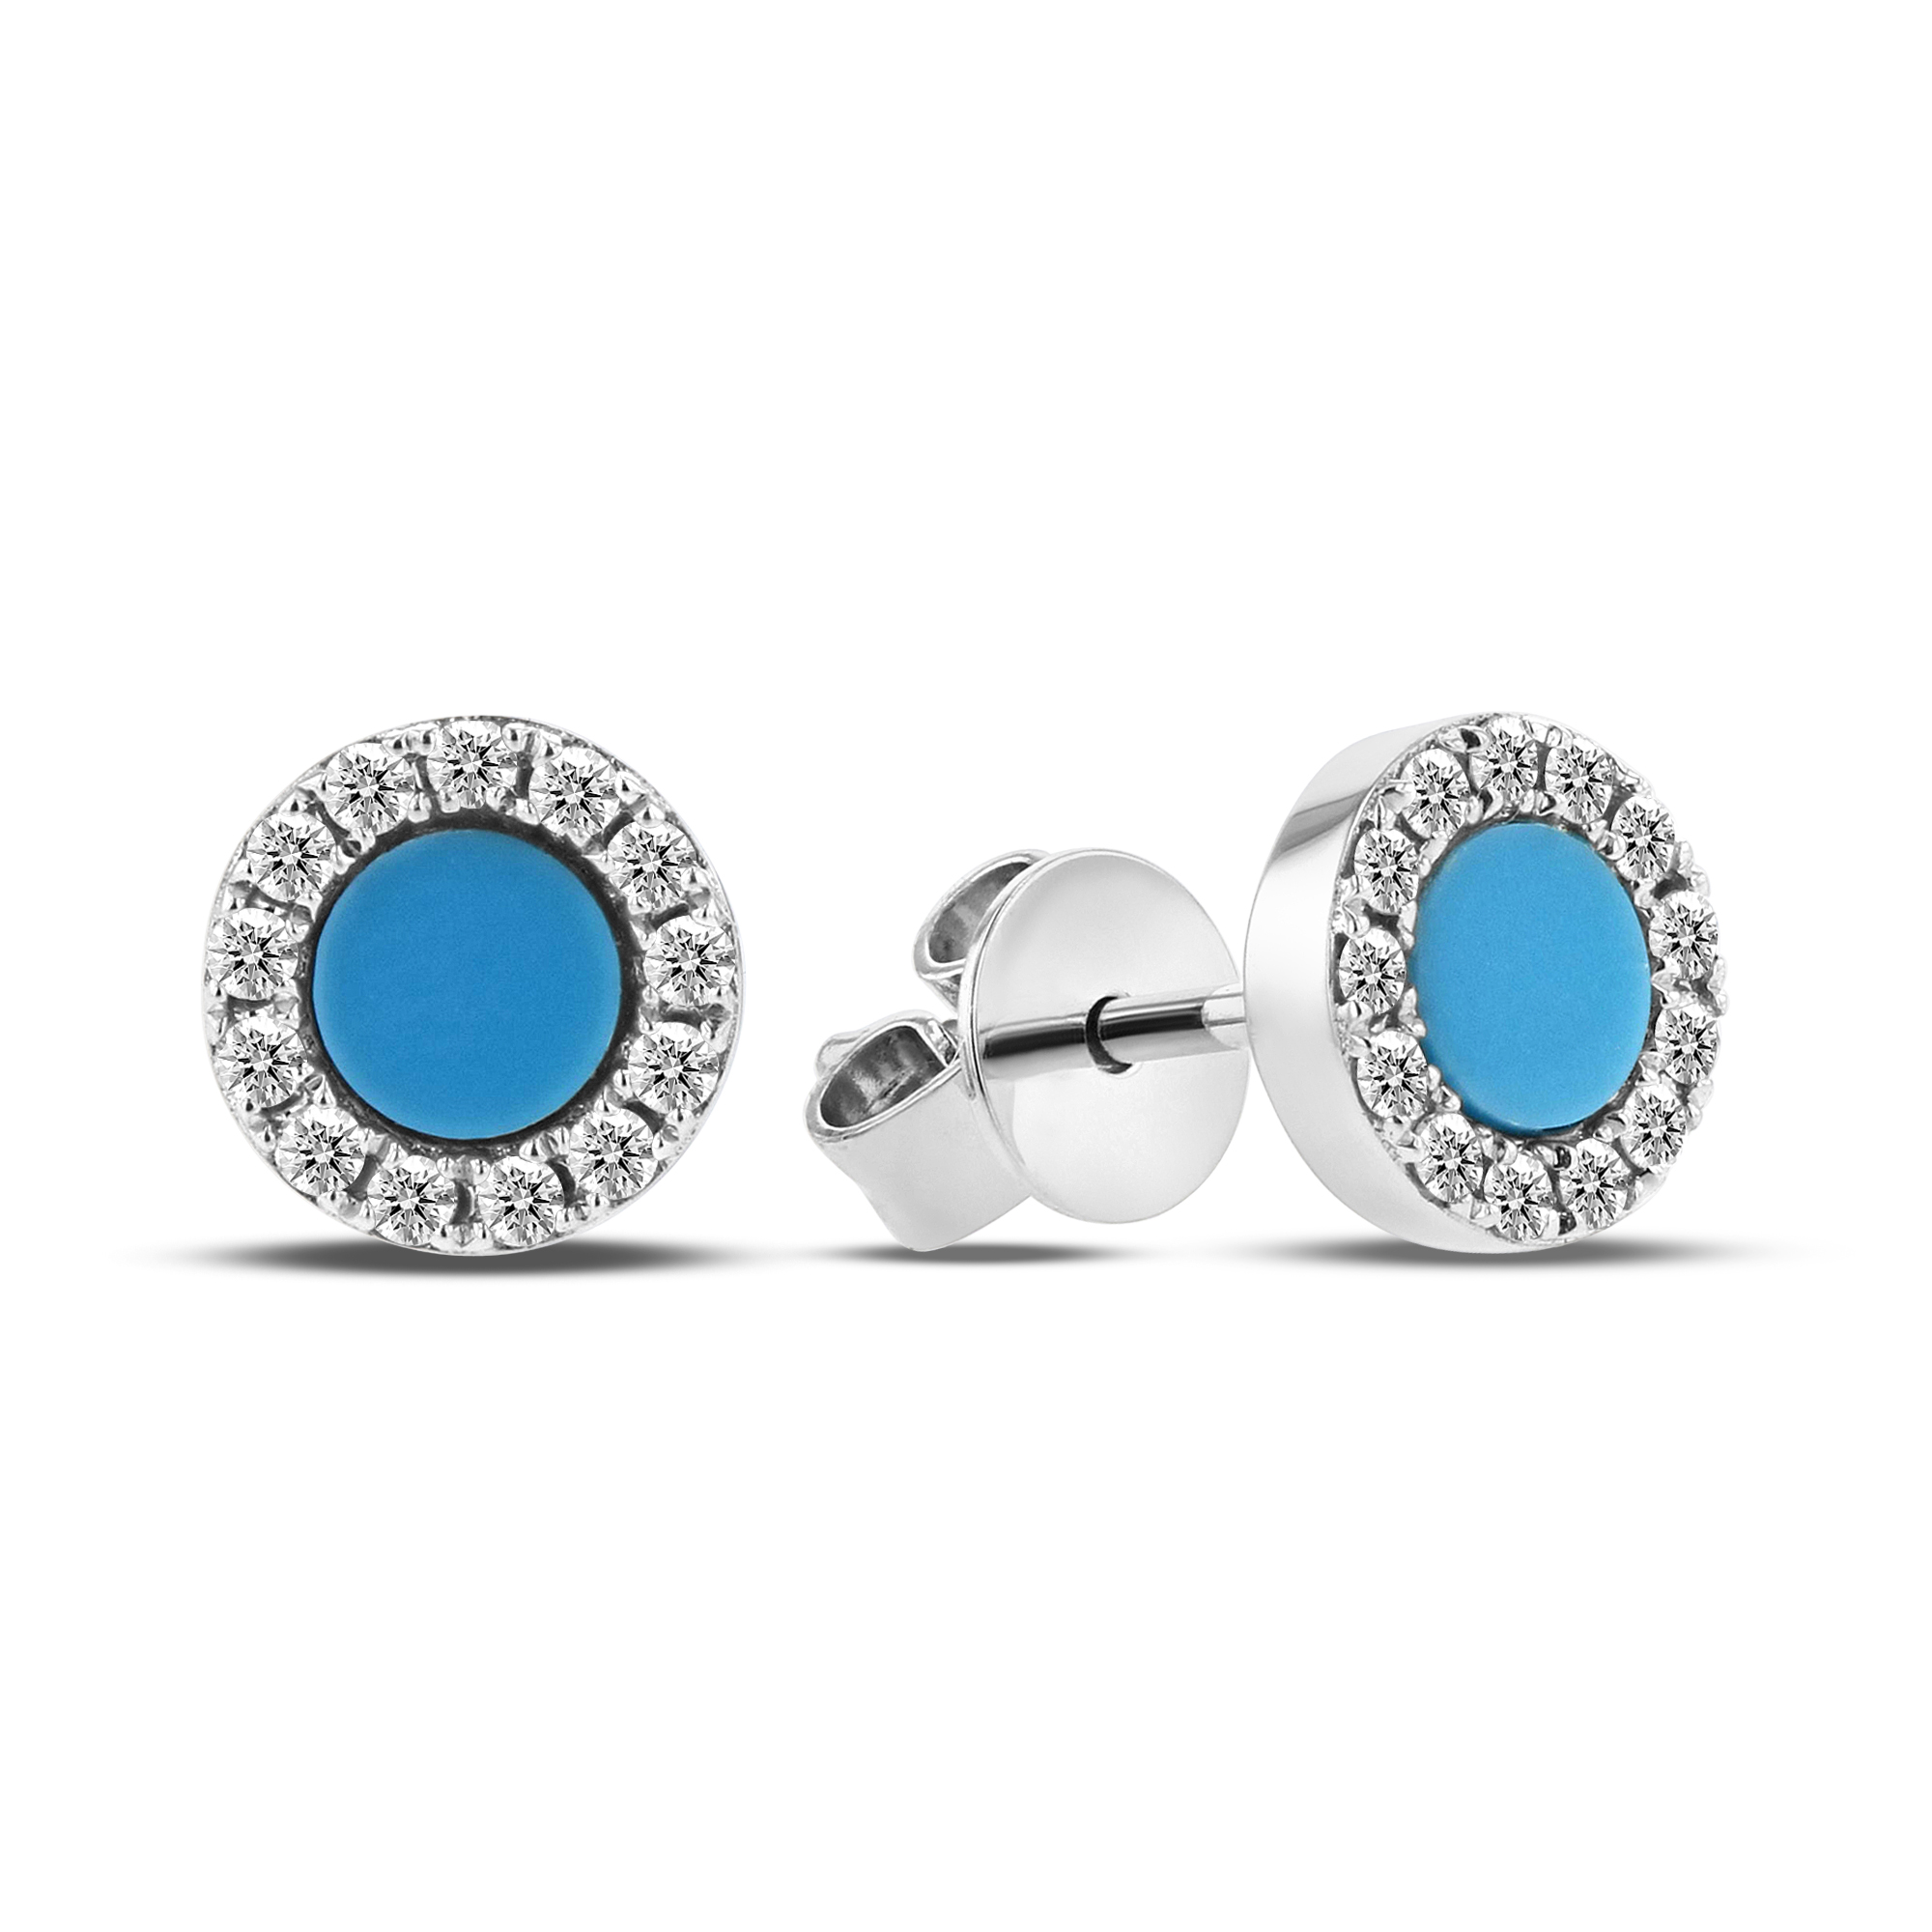 View 0.16ctw Diamond and Turquoise Earring in 14k White Gold